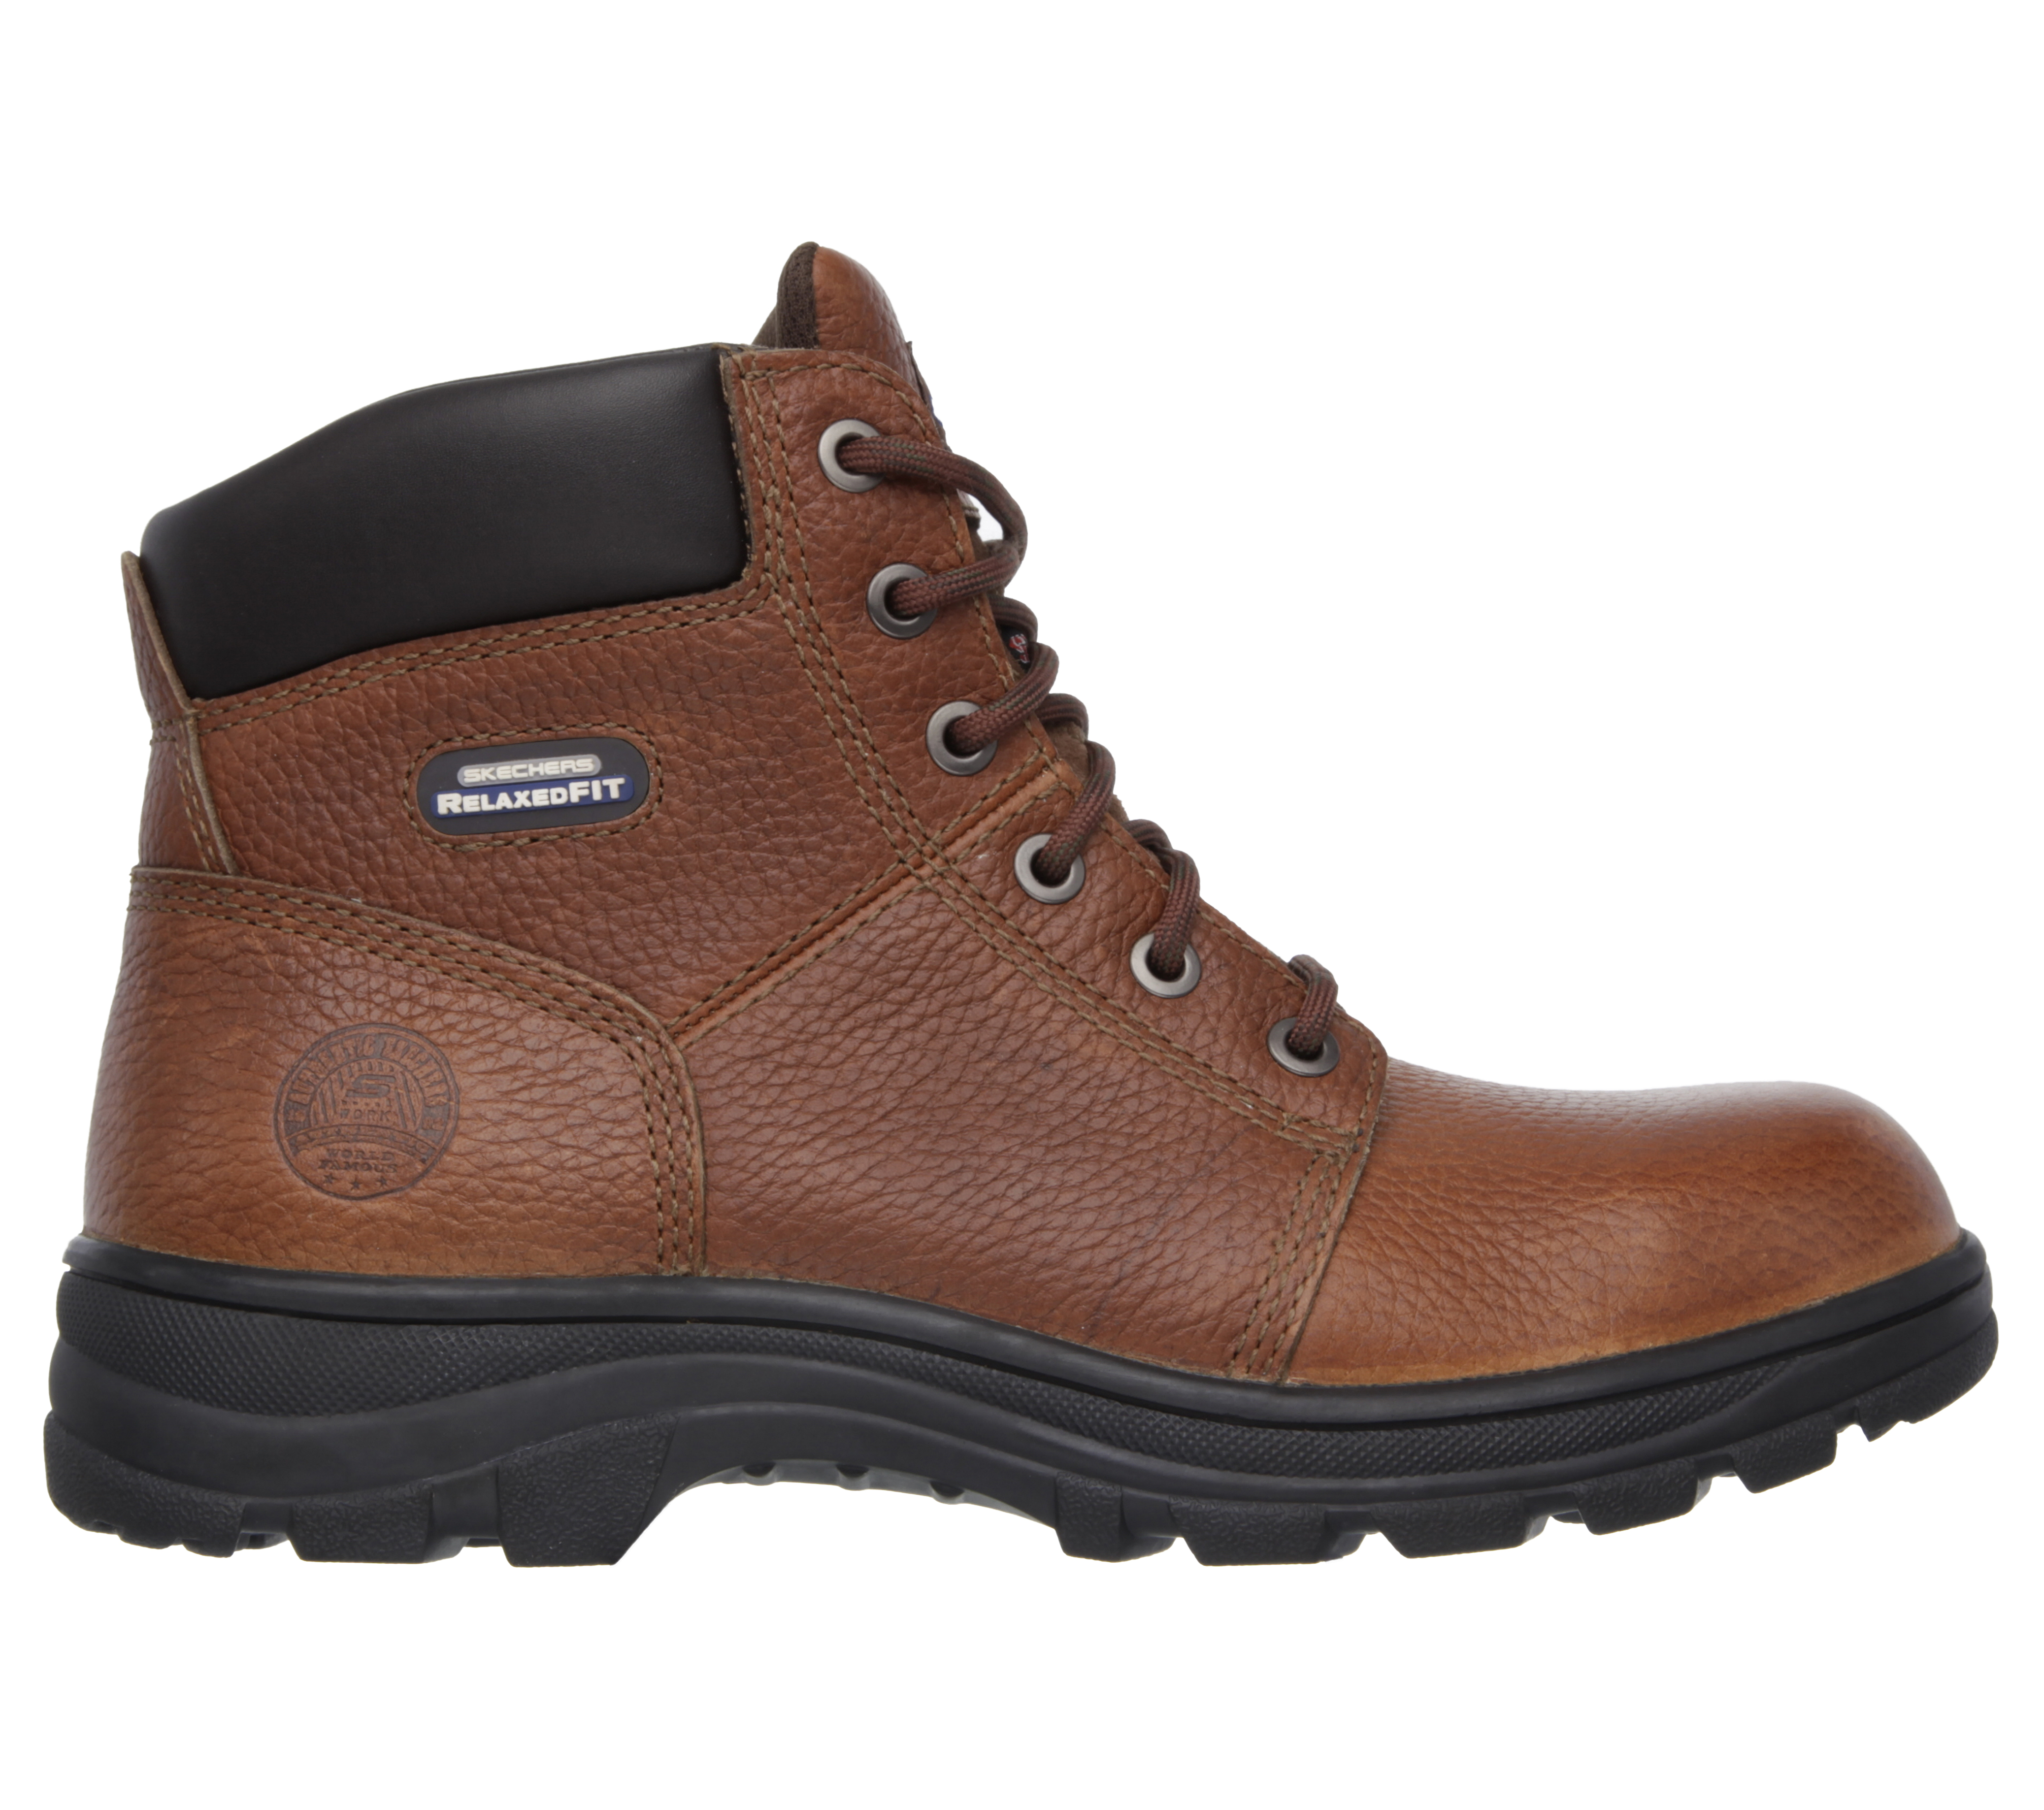 skechers pull on work boots